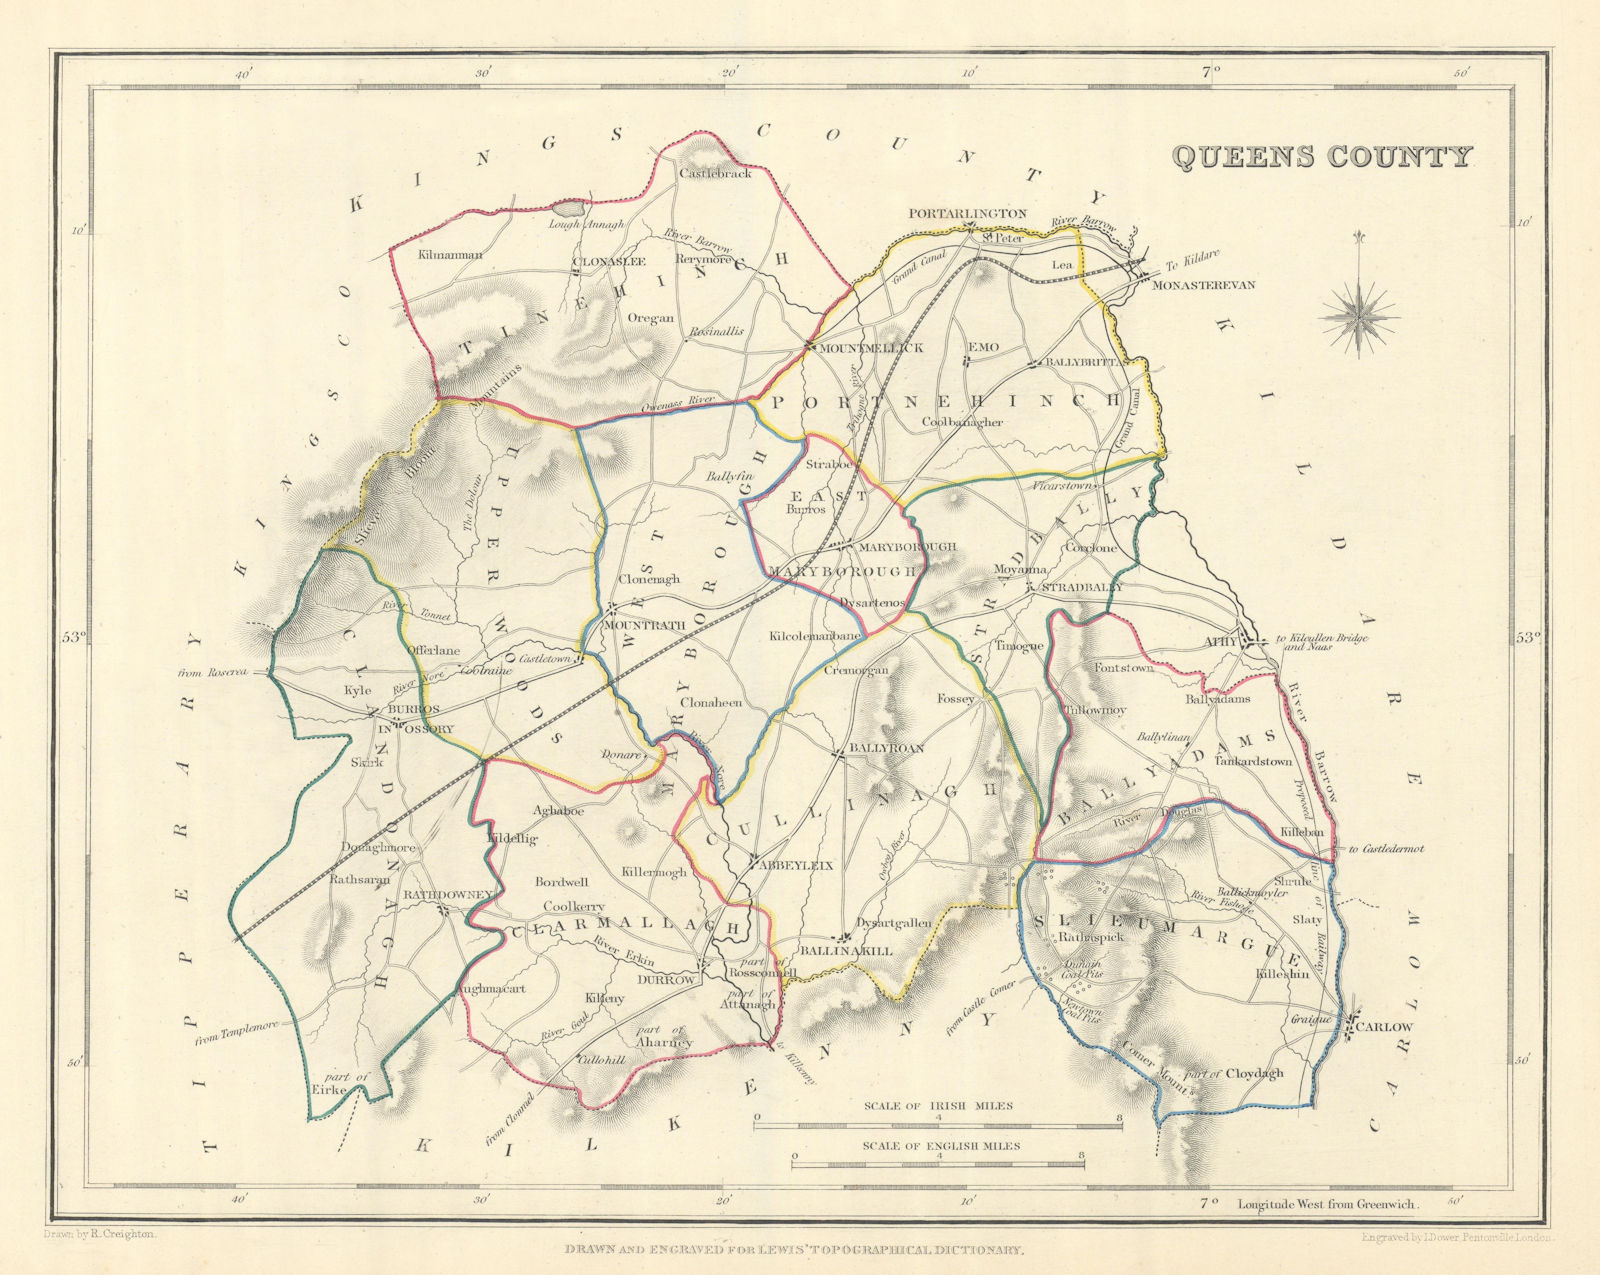 QUEENS COUNTY (LAOIS) antique map for LEWIS. CREIGHTON & DOWER. Ireland 1850